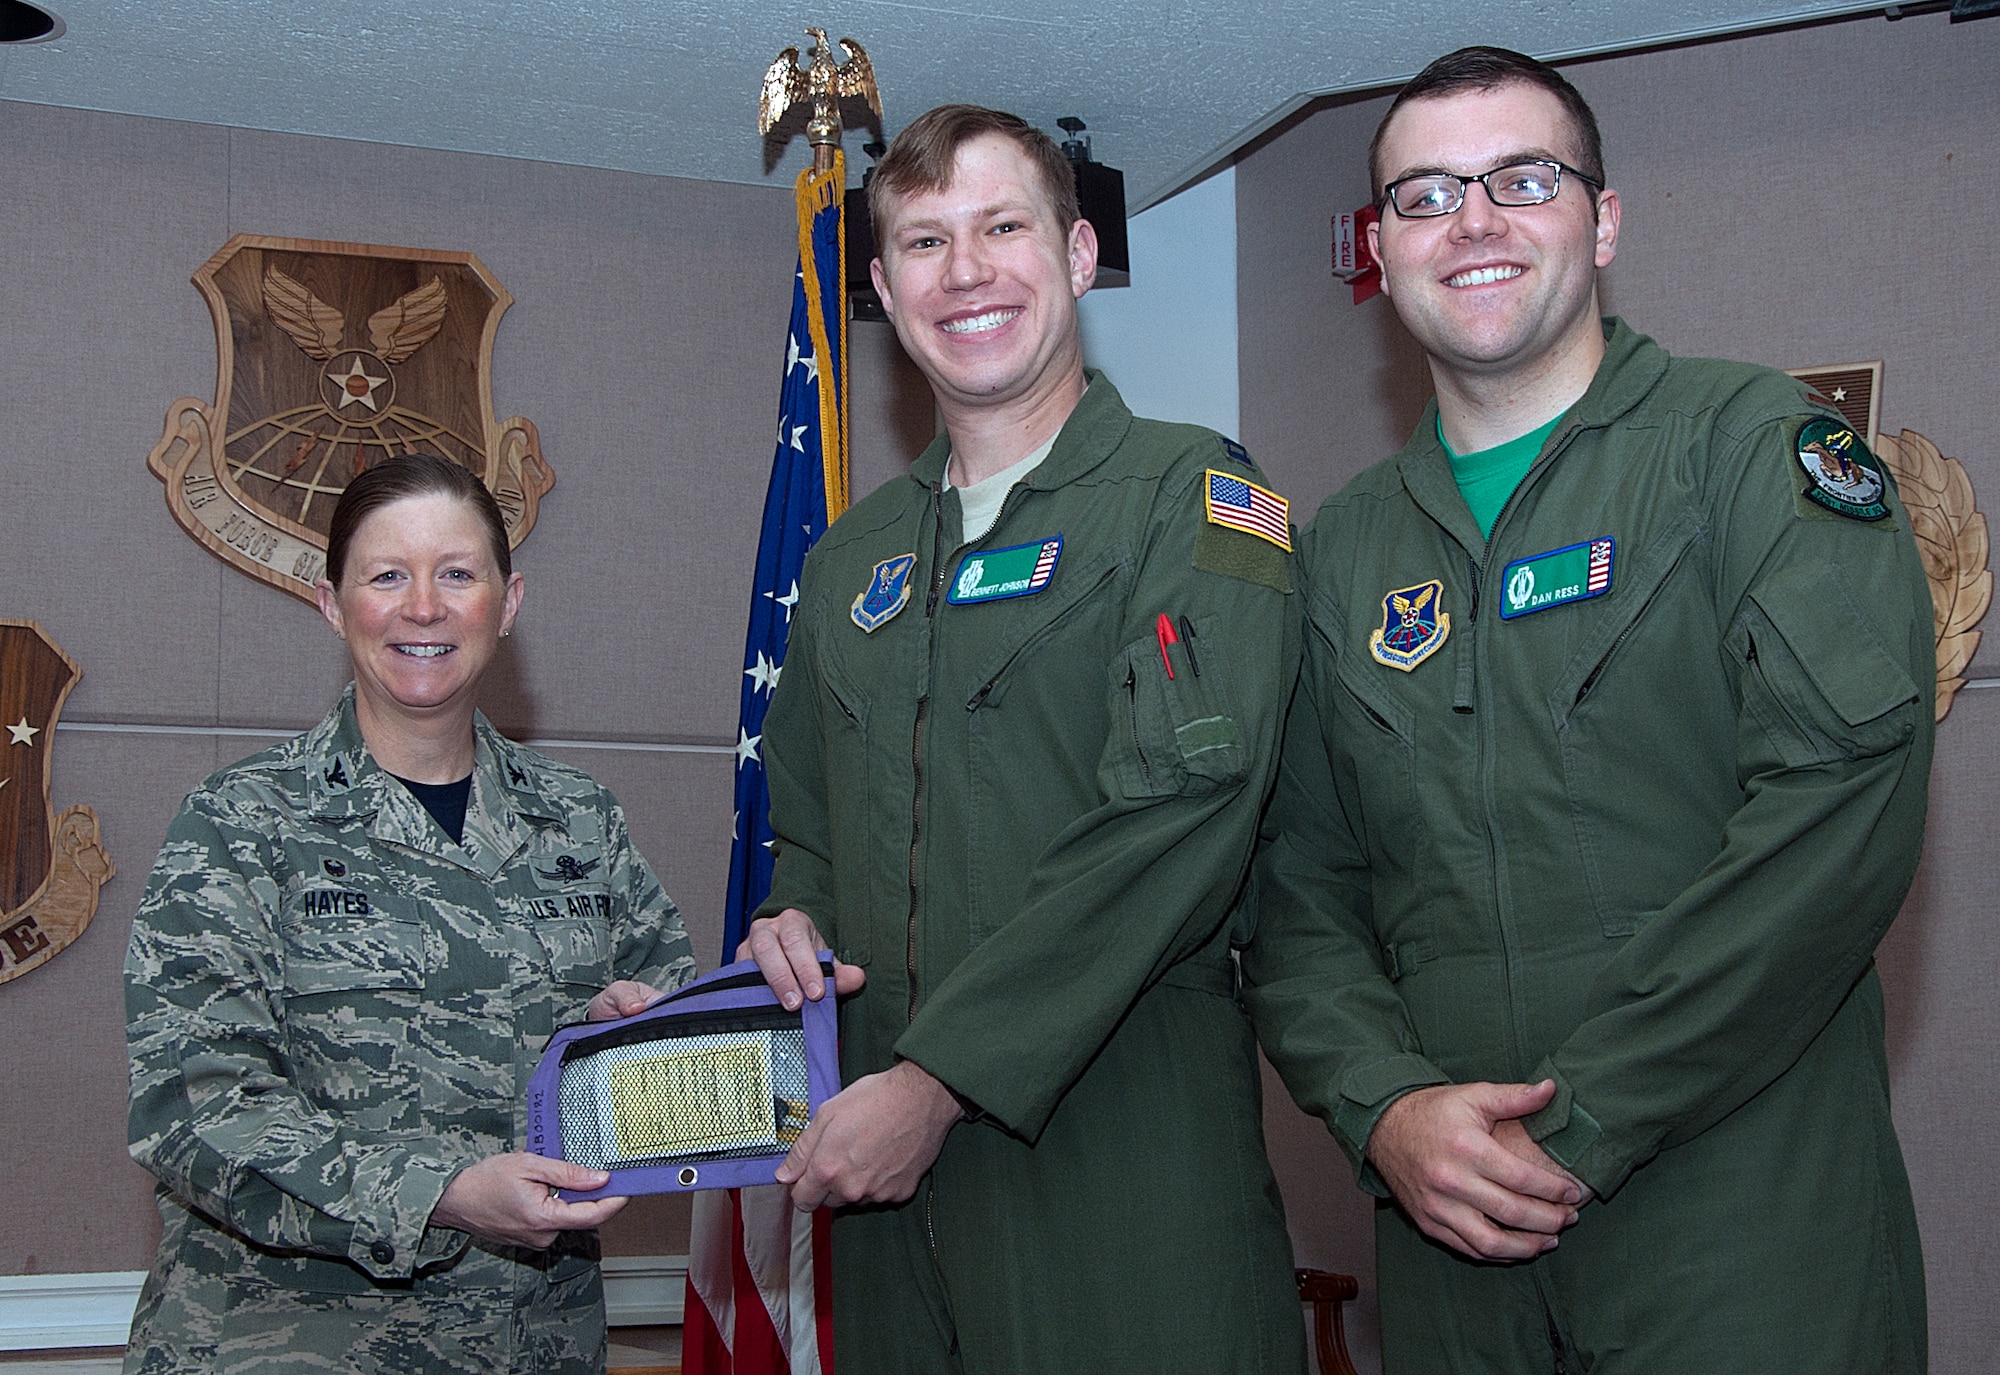 Capt. Bennett Johnson and 2nd Lt. Dan Ress, 321st Missile Squadron missileers, pose with Col. Tracey Hayes, 90th Missile Wing commander, as she presents them the keys to a new government-owned vehicle Dec. 5, 2014, in the 90th Operations Group pre-departure room, F.E. Warren Air Force Base, Wyo. Johnson and Ress were one of two sets of missileers to use one of the new trucks when traveling to the missile field. (U.S. Air Force photo/Airman 1st Class Brandon Valle)